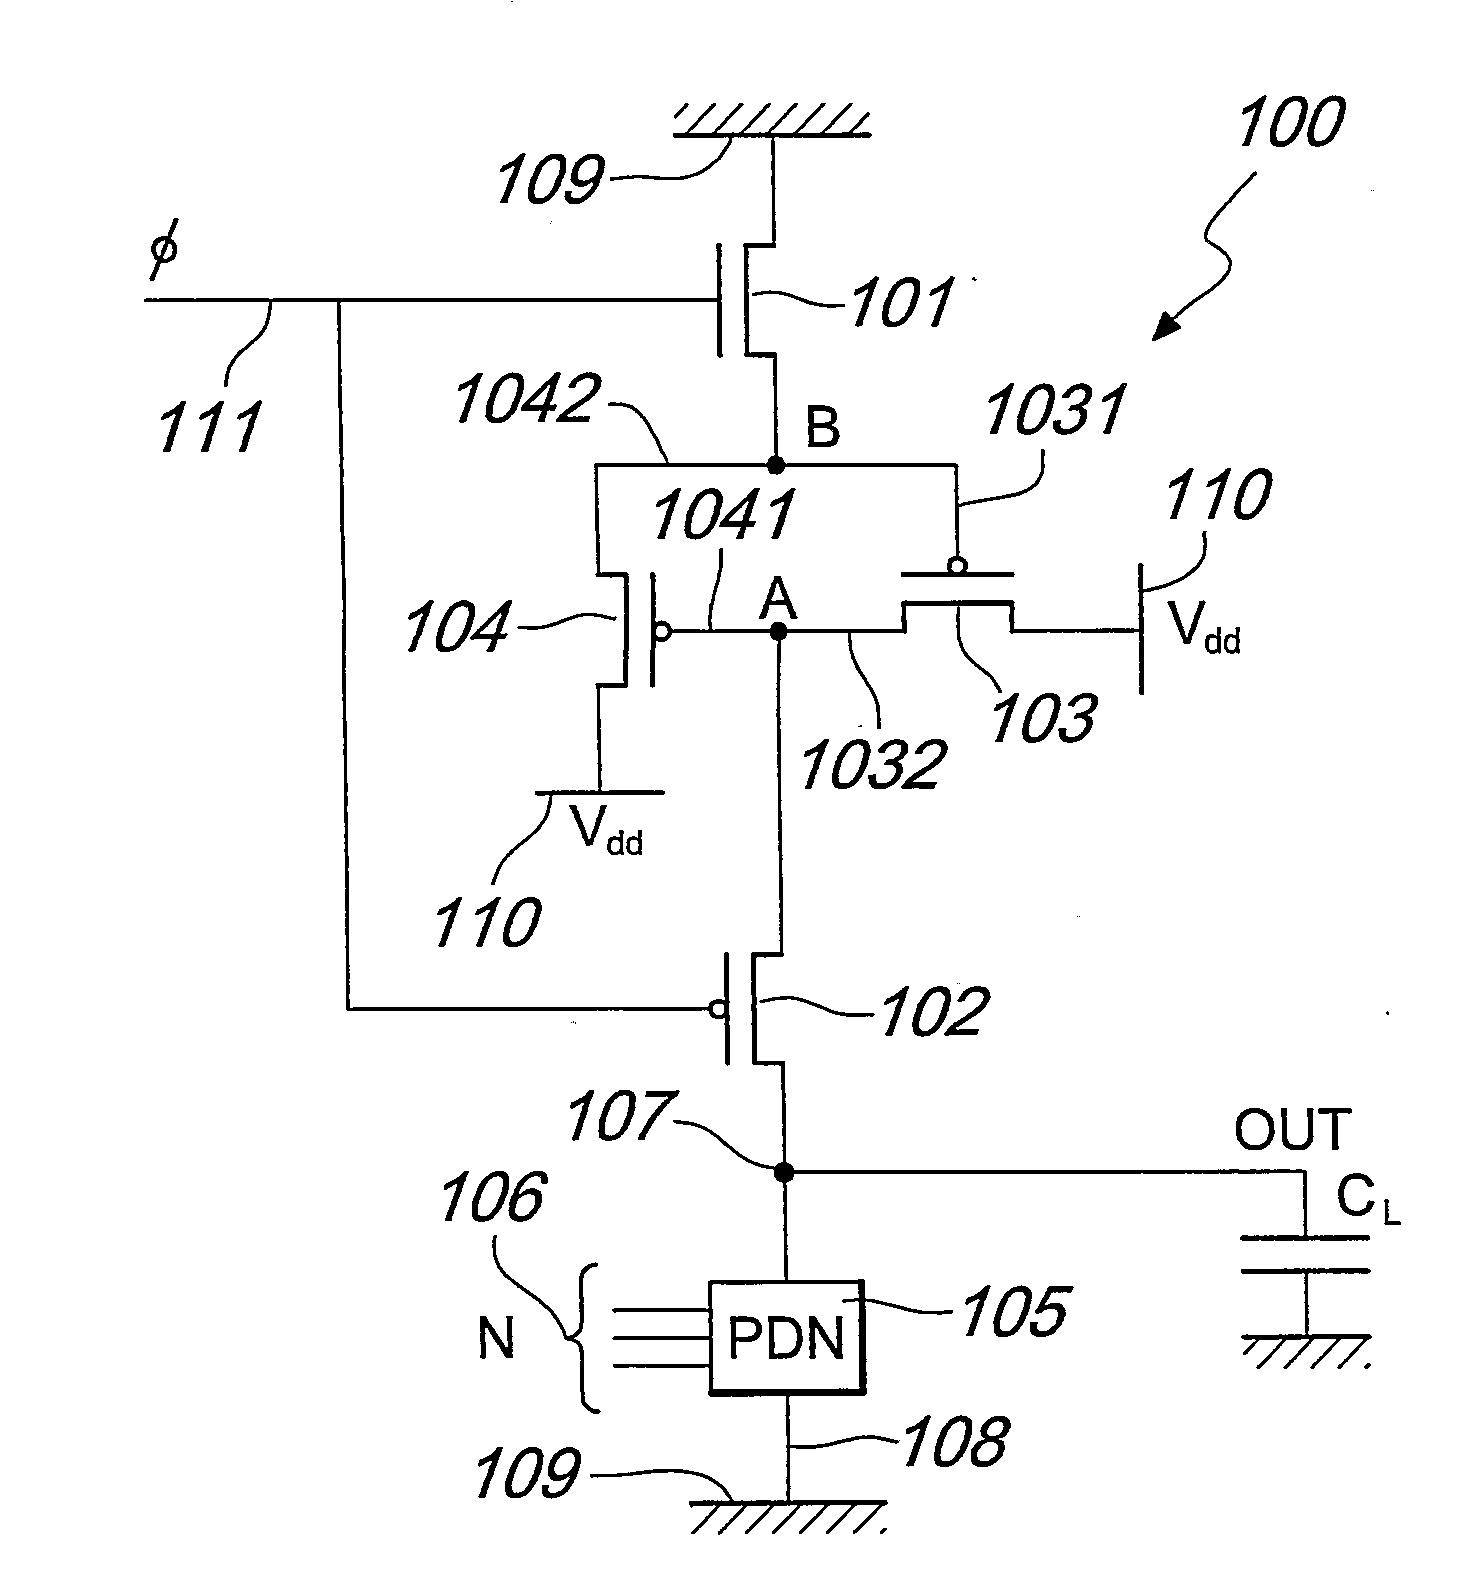 Logic gate with a reduced number of switches, especially for applications in integrated circuits